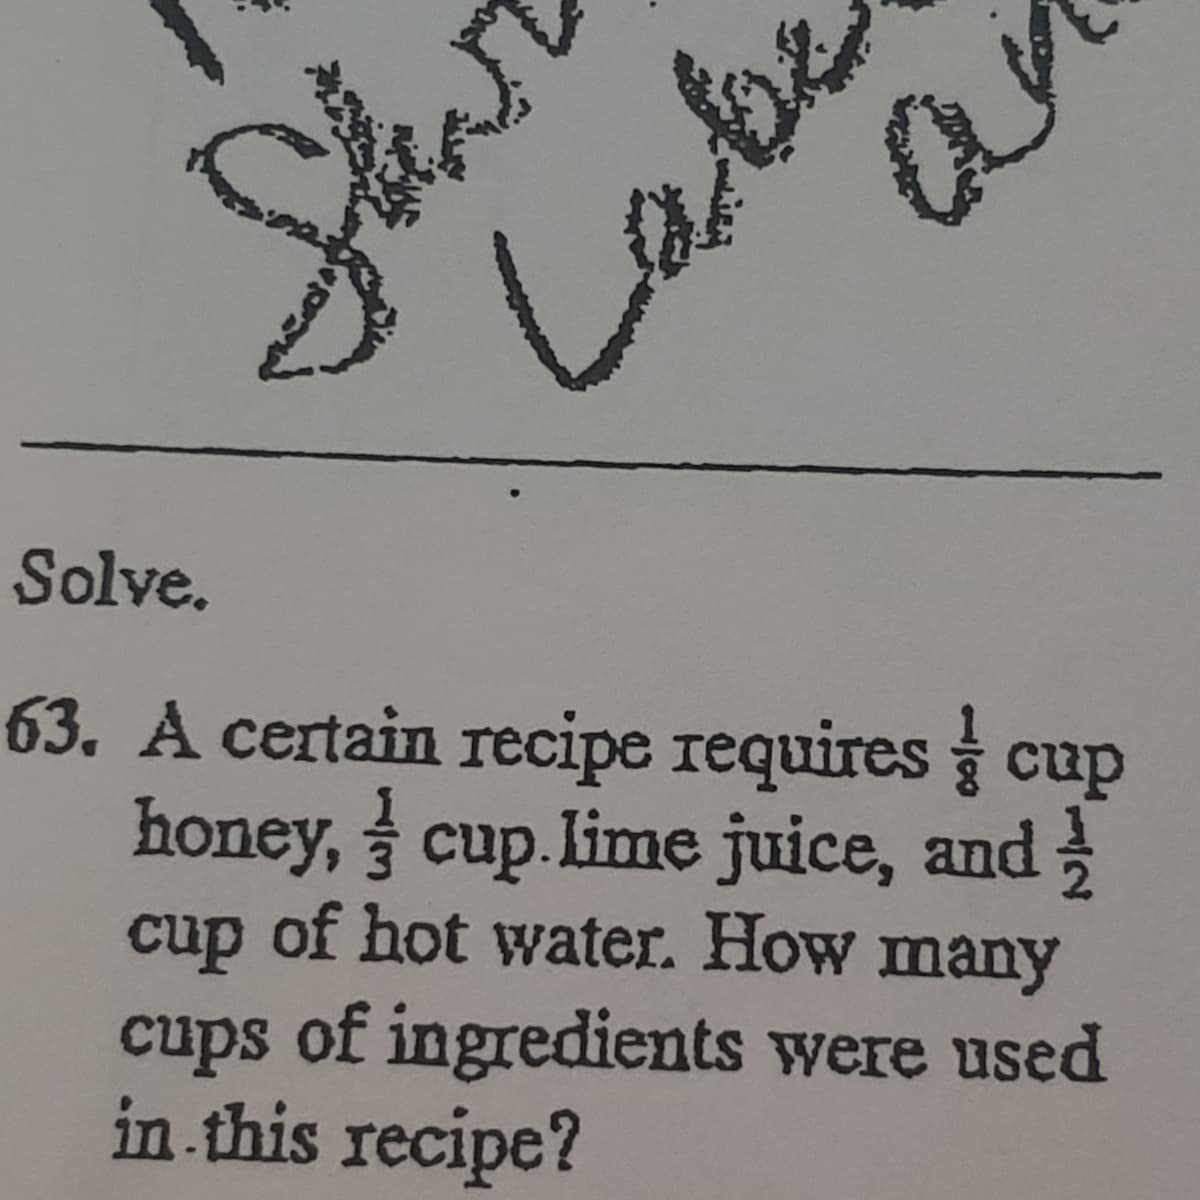 Solve.
63. A certain recipe requires cup
honey, cup.lime juice, and
cup of hot water. How many
cups of ingredients were used
in this recipe?
